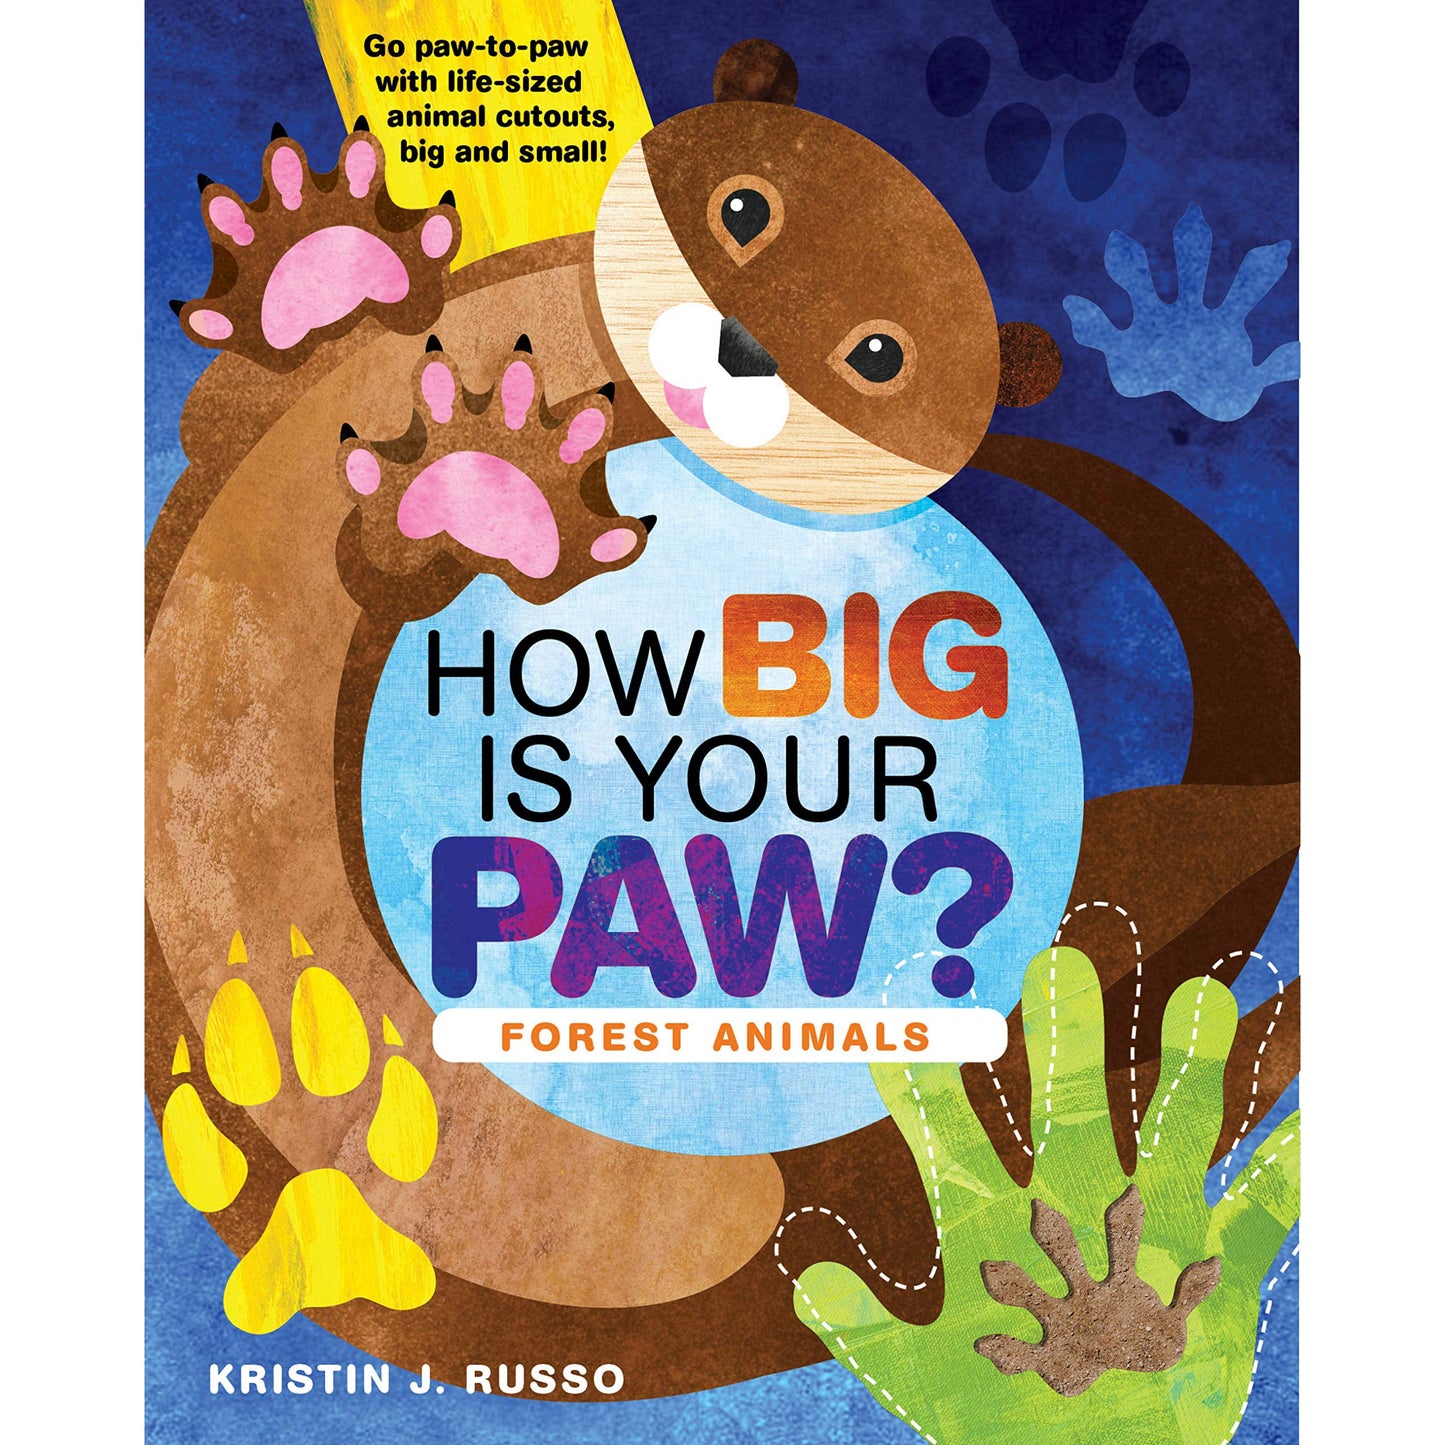 How Big is Your Paw?: Forest Animals